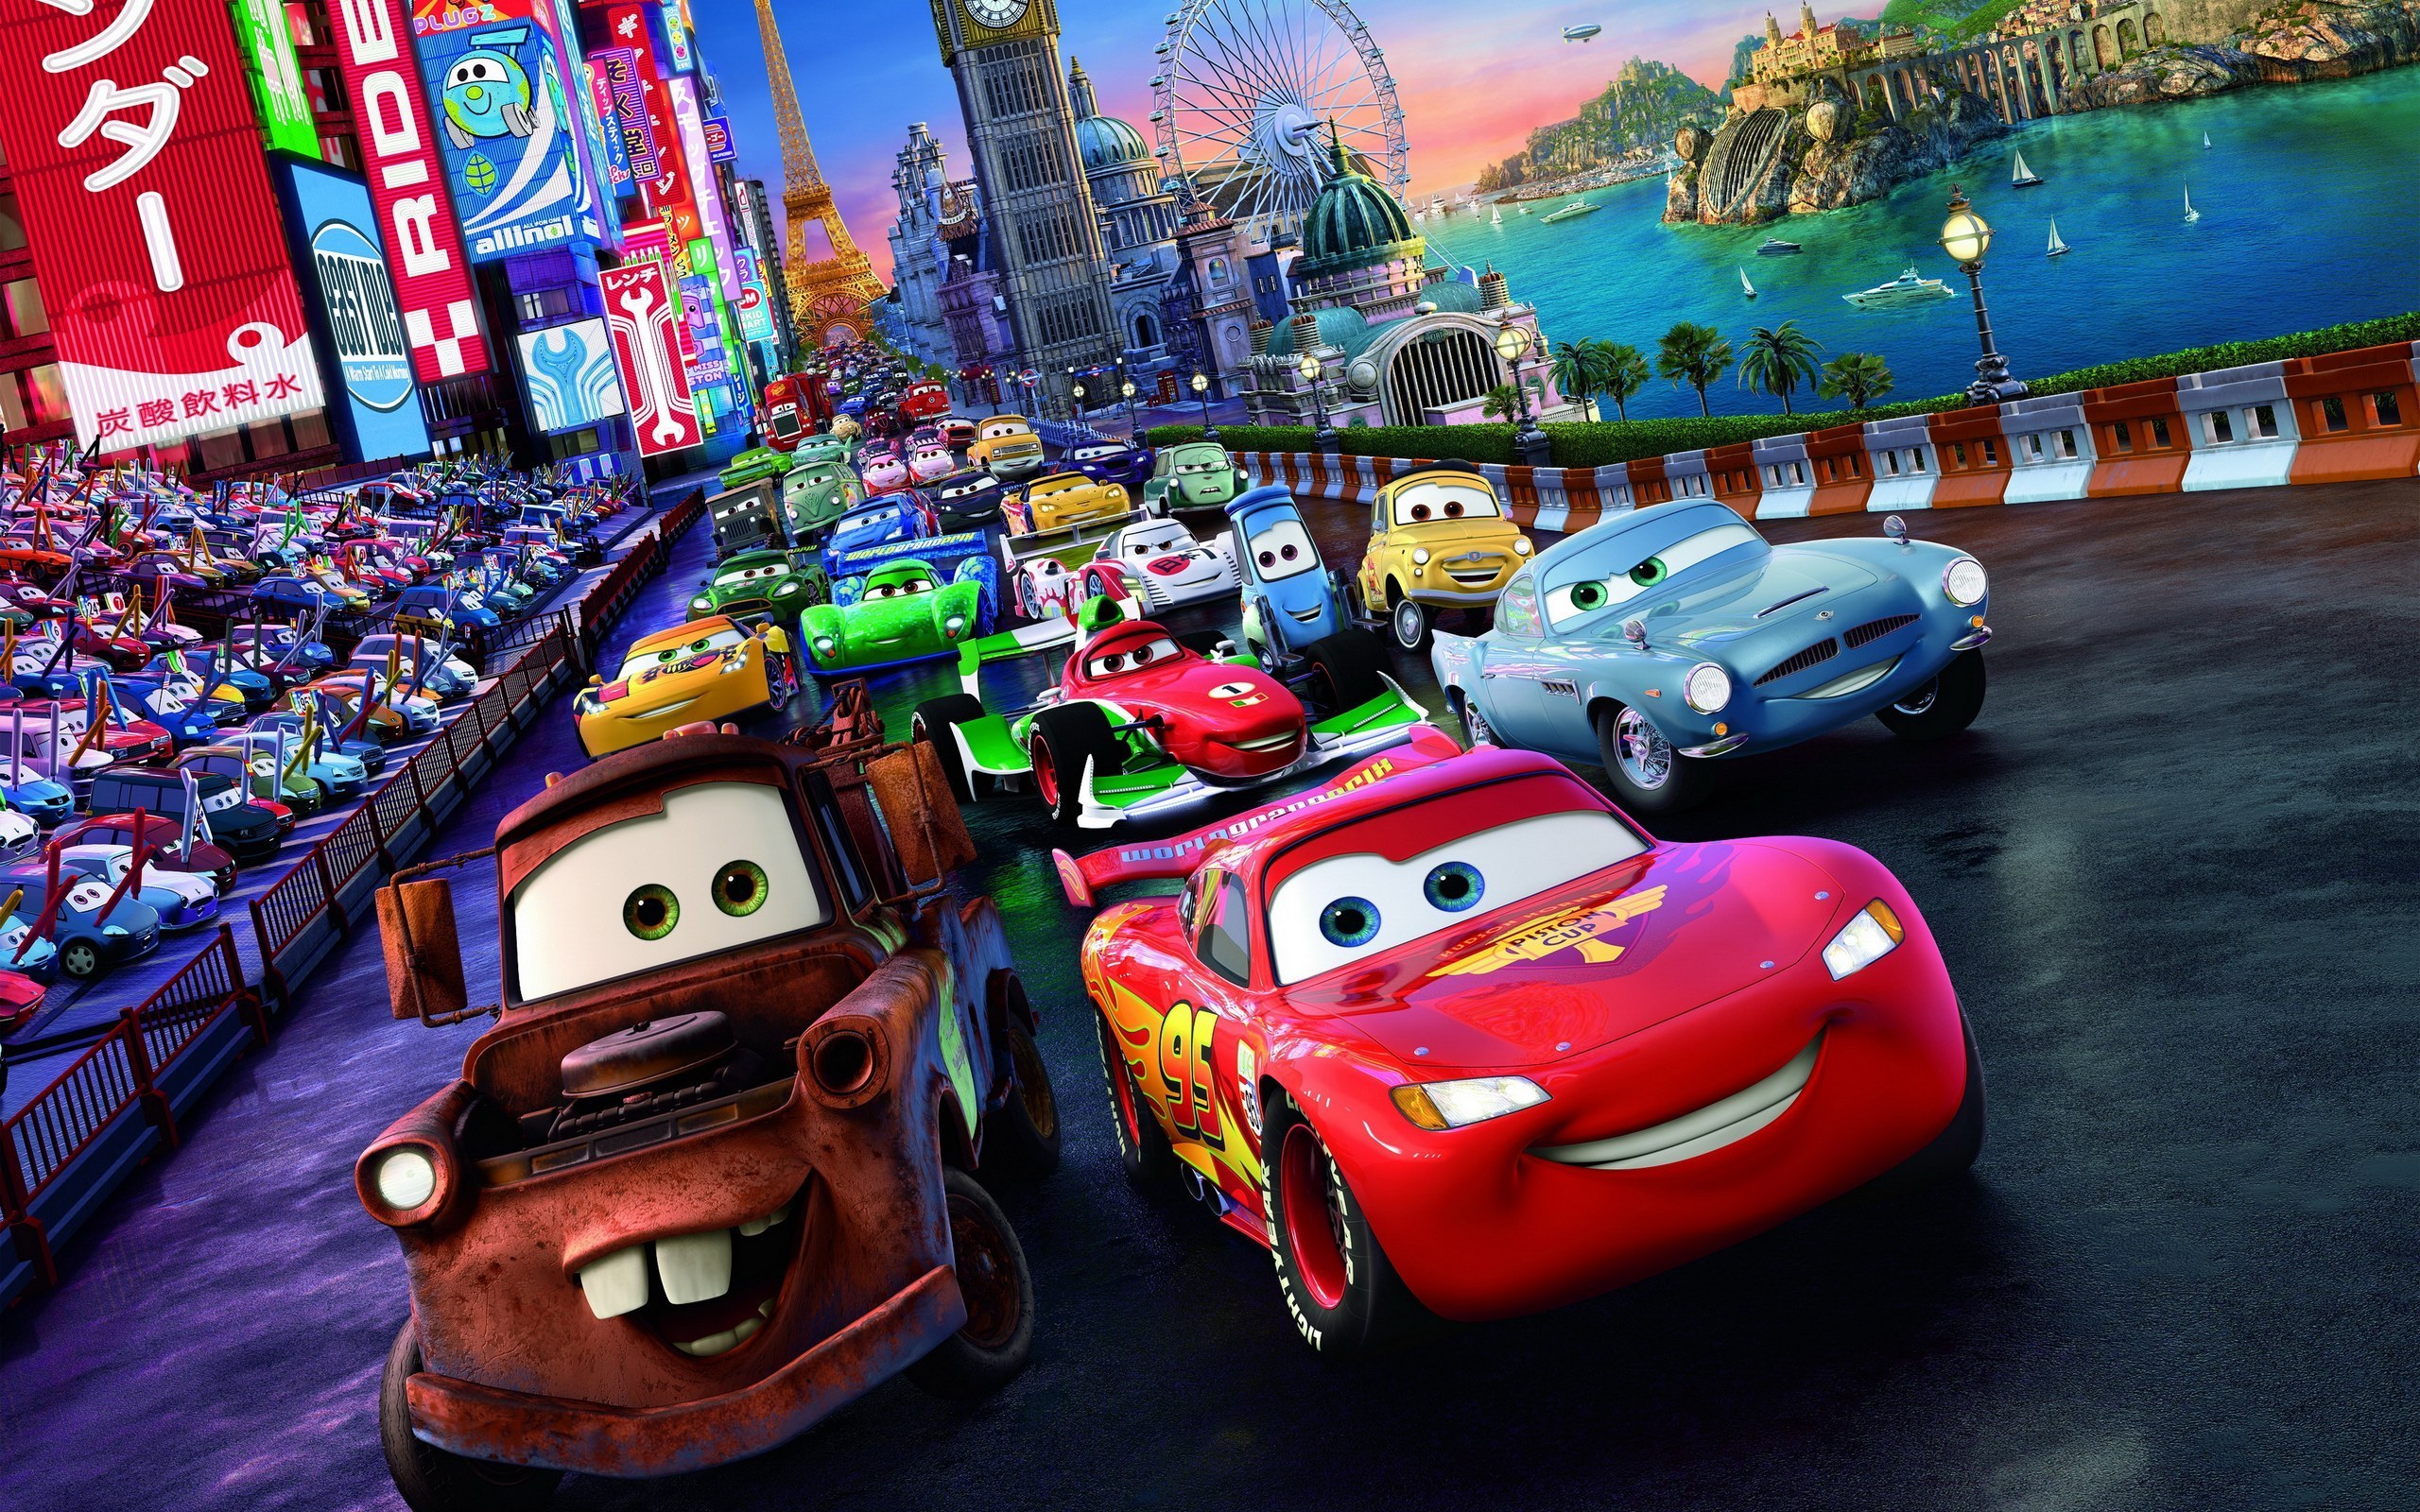 Disney Cars Wallpaper, Download Wallpapers on Jakpost.travel.